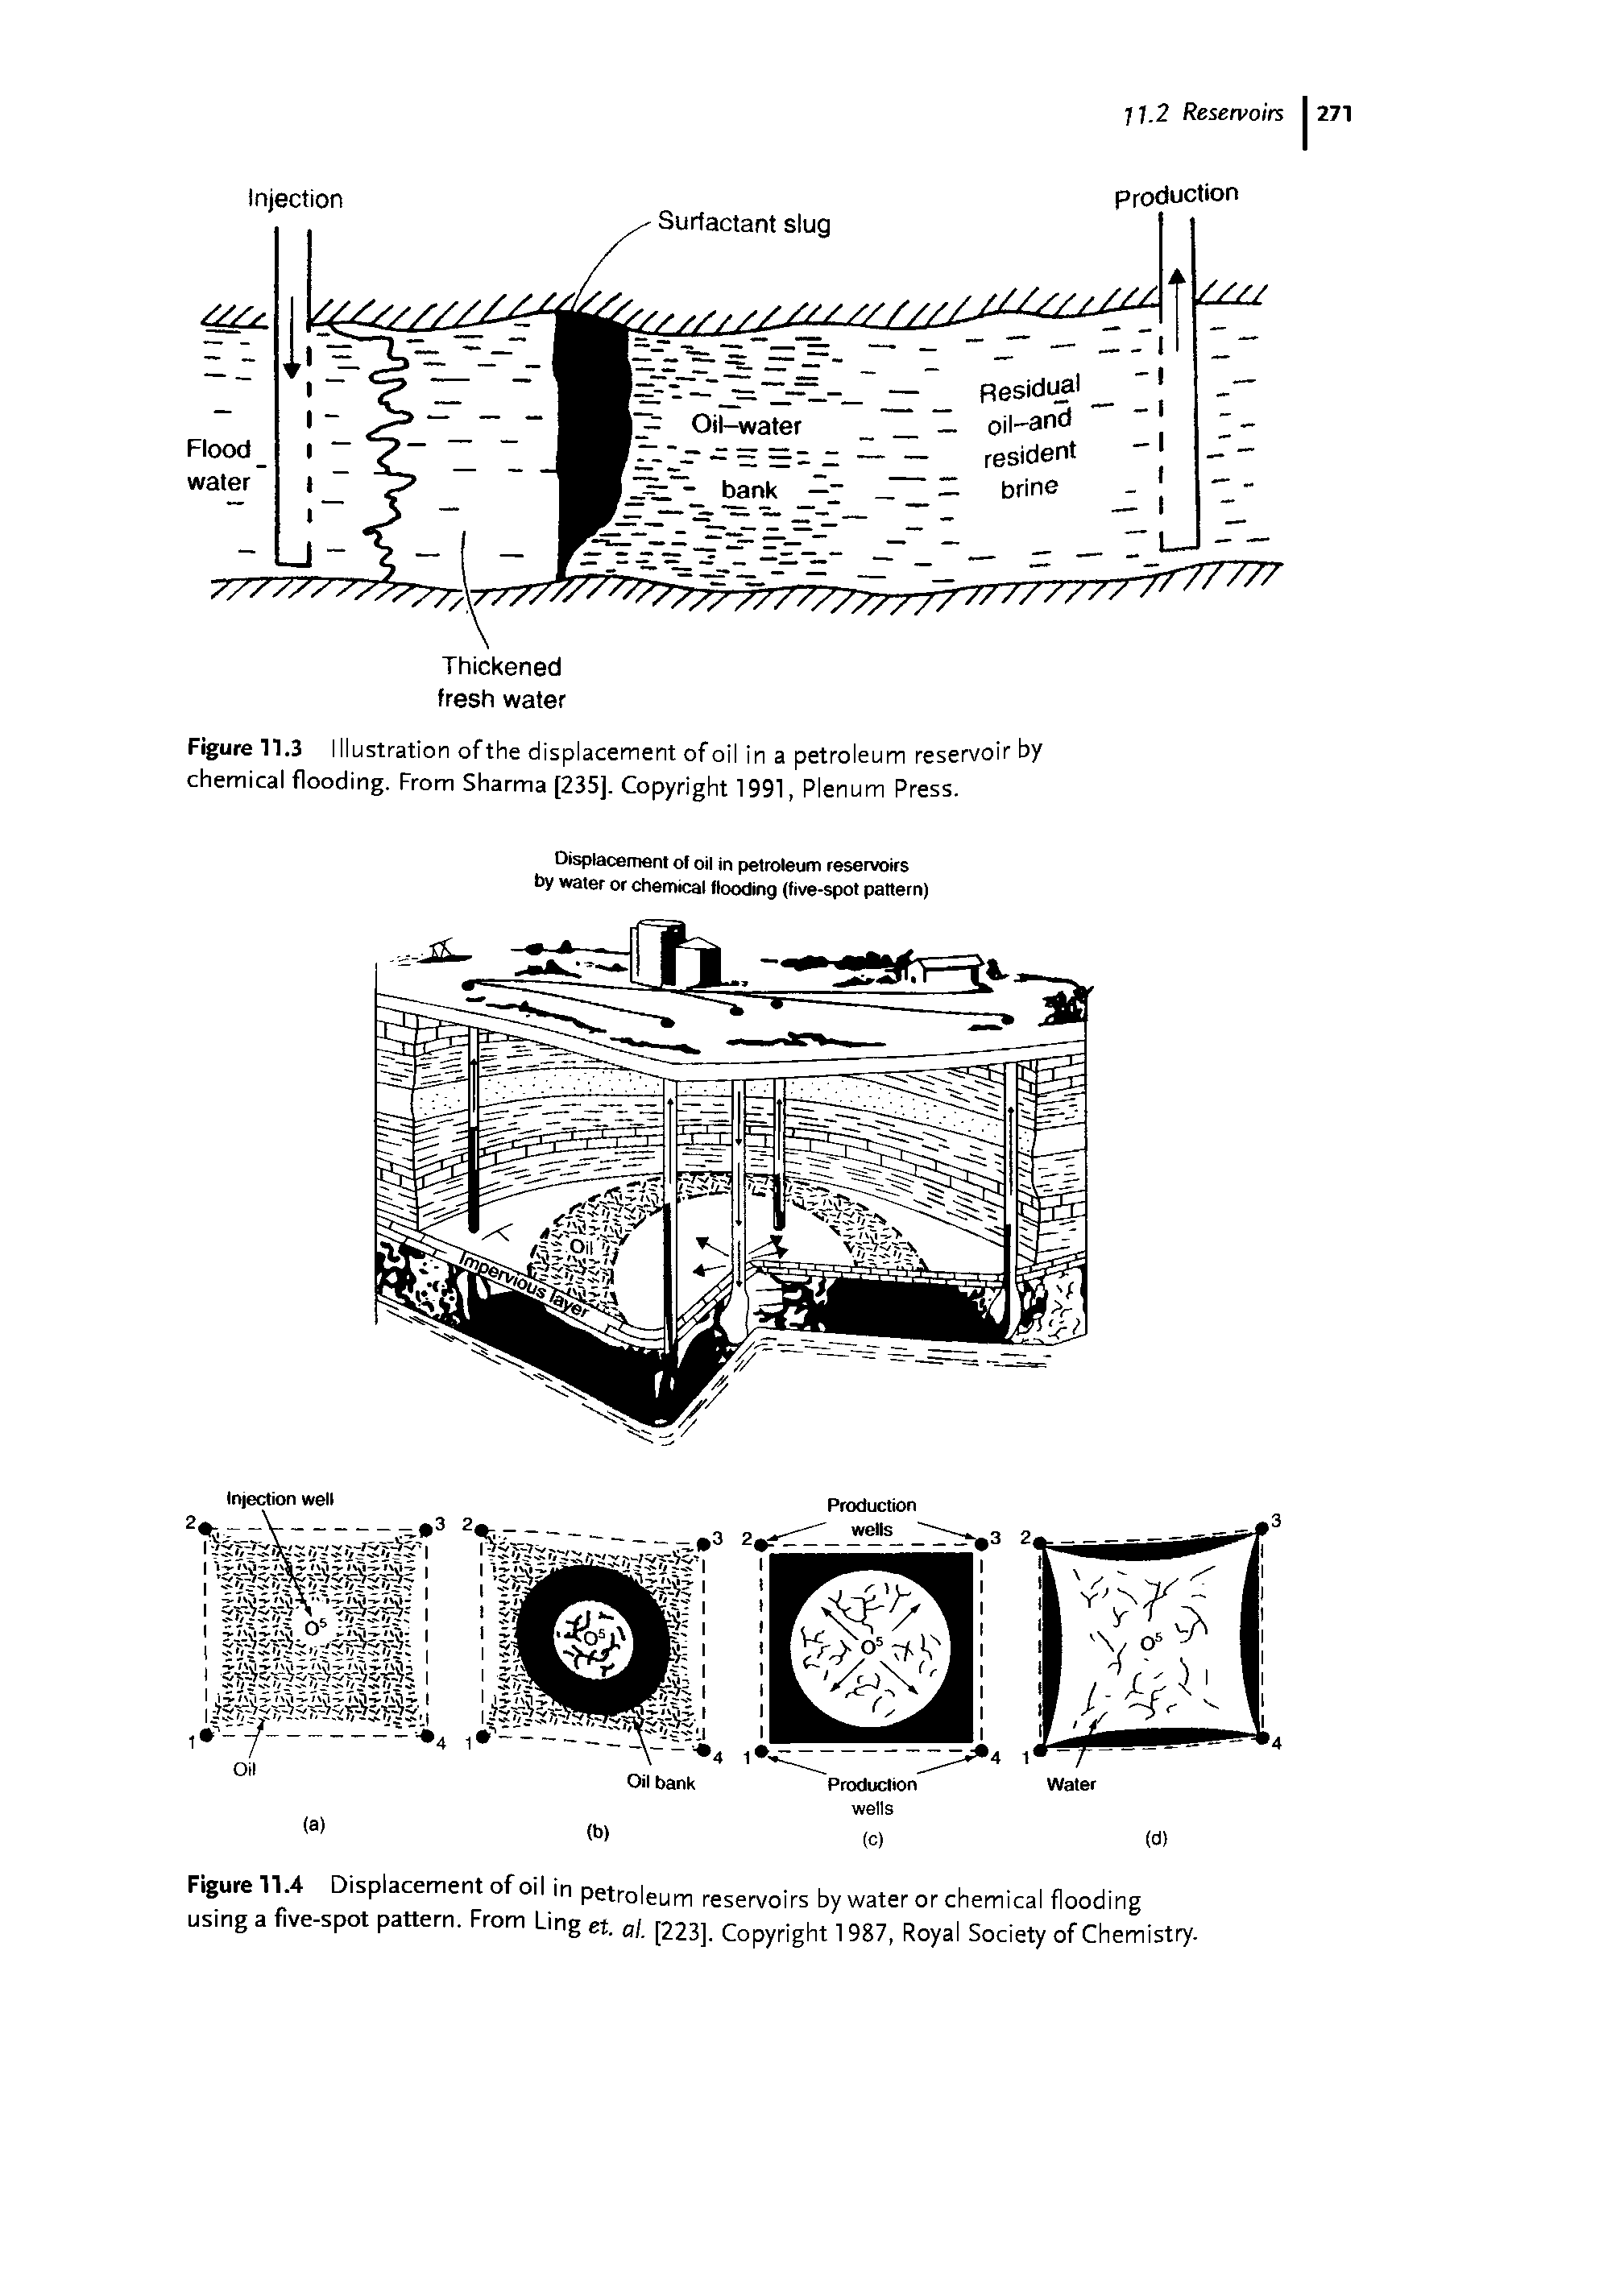 Figure 11.3 Illustration ofthe displacement of oil in a petroleum reservoir by chemical flooding. From Sharma [235]. Copyright 1991, Plenum Press.